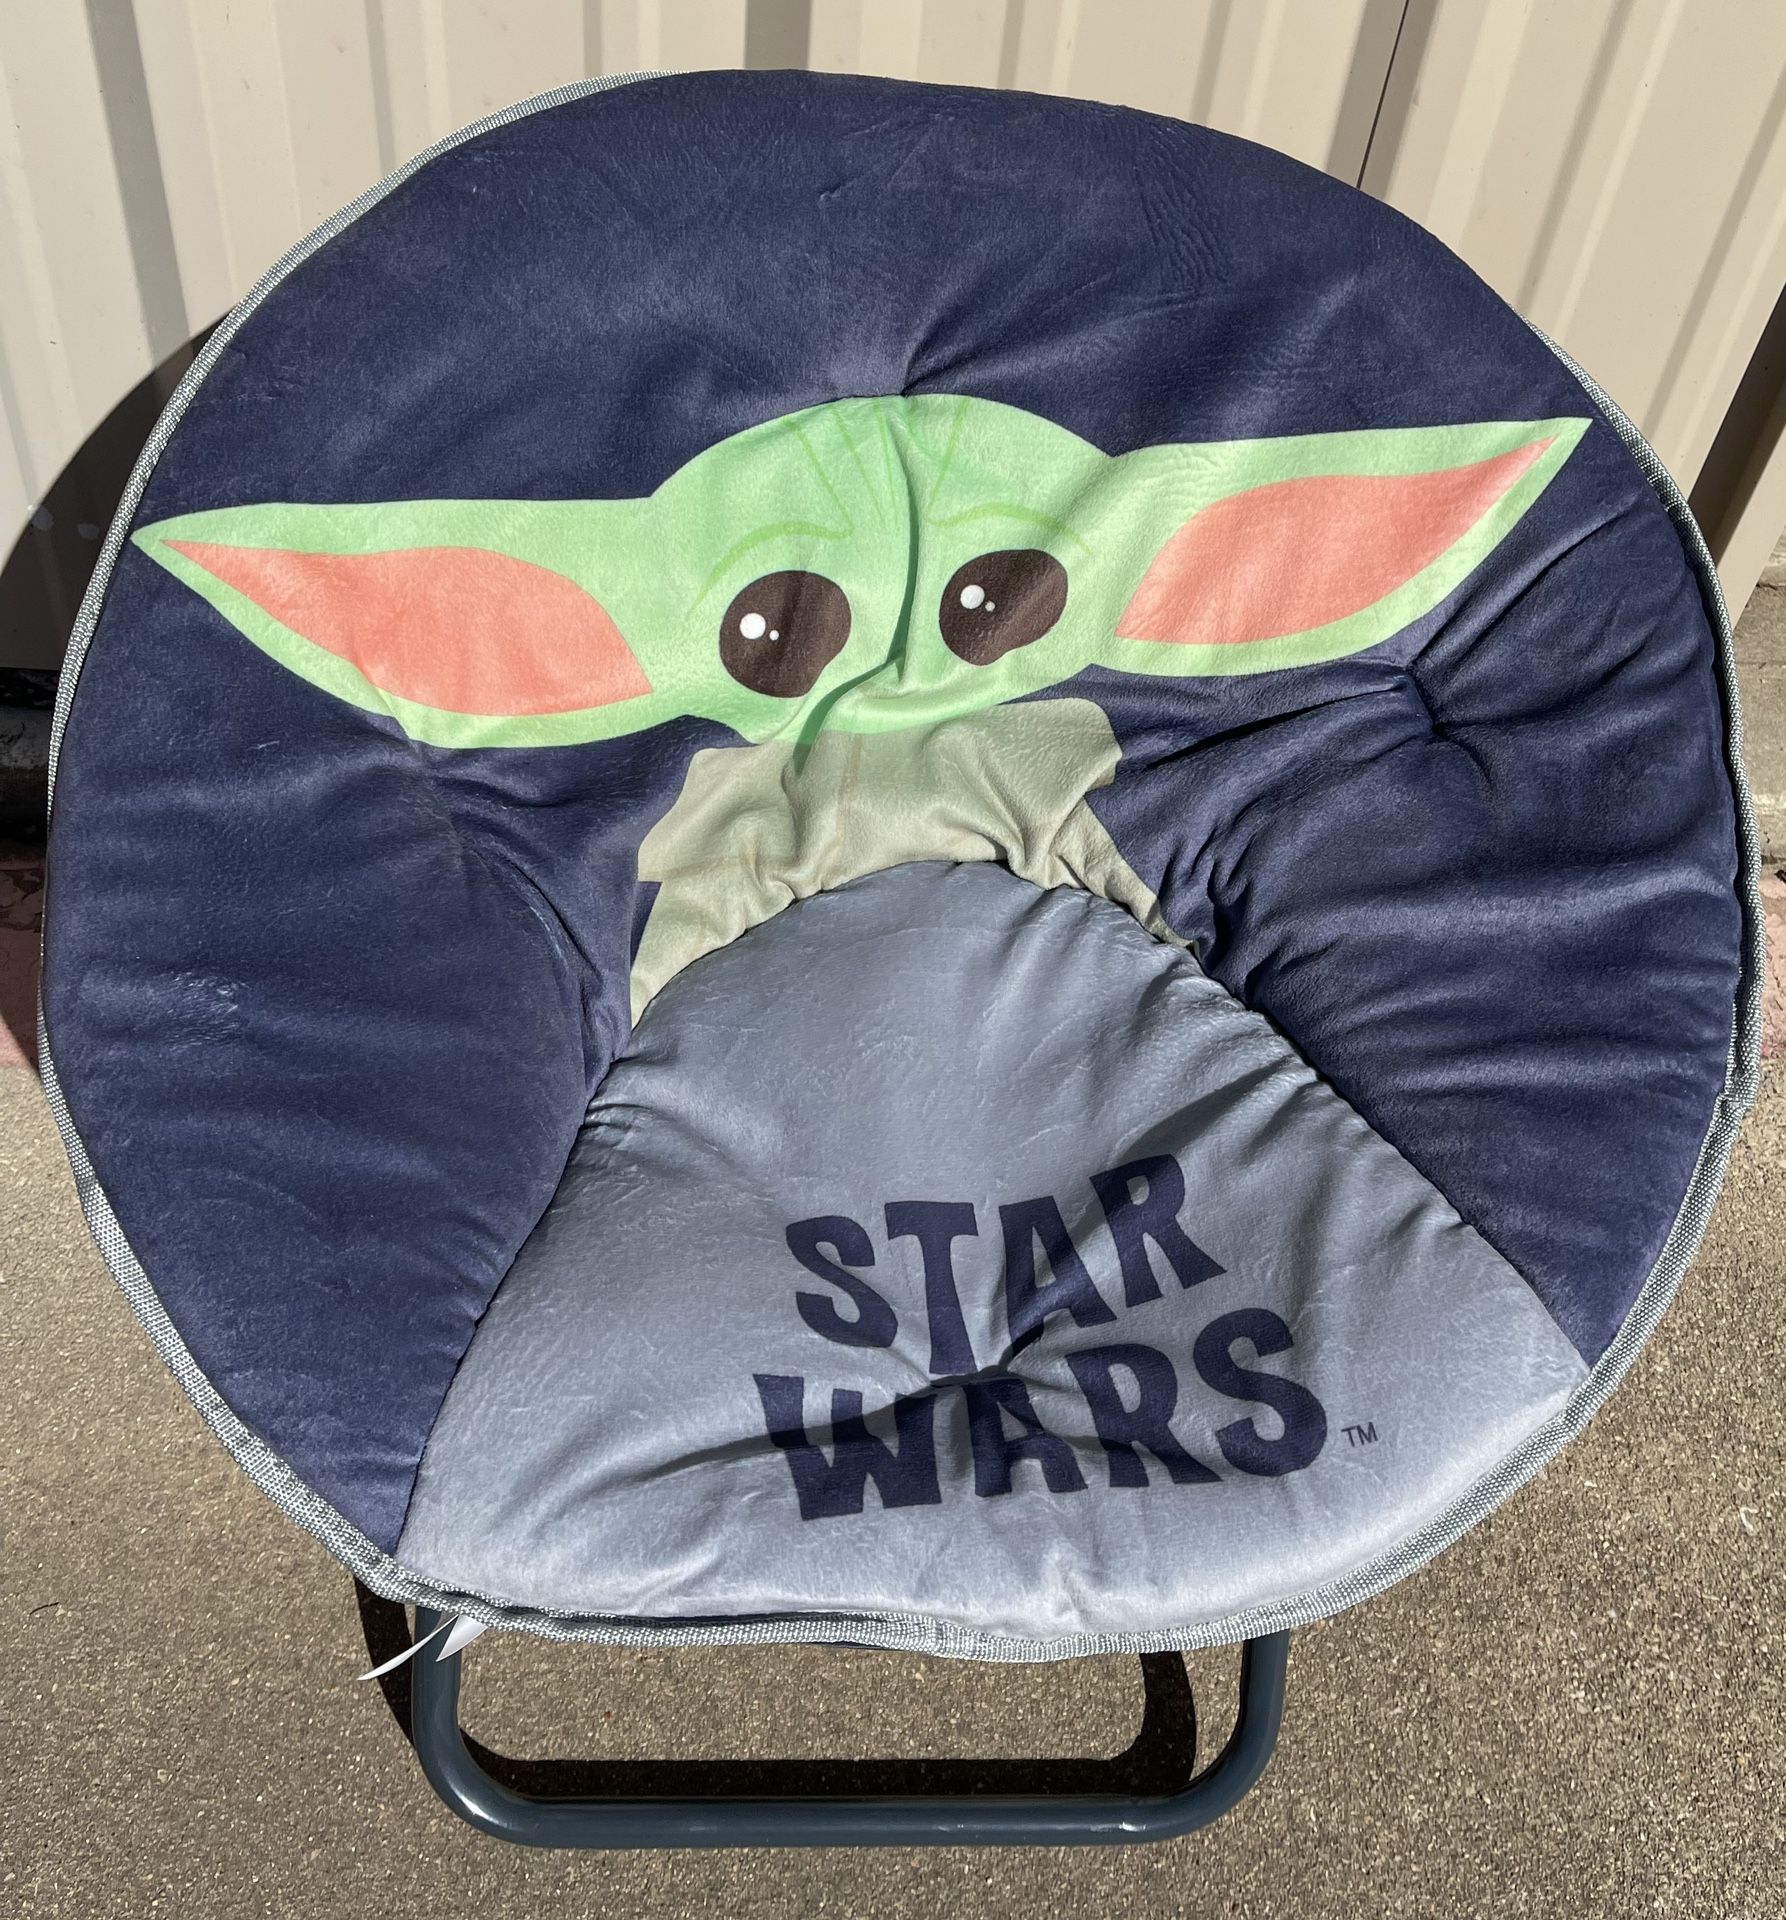 Star Wars: The Mandalorian Featuring The Child 23" Folding Saucer Chair  ▶️New in box◀️